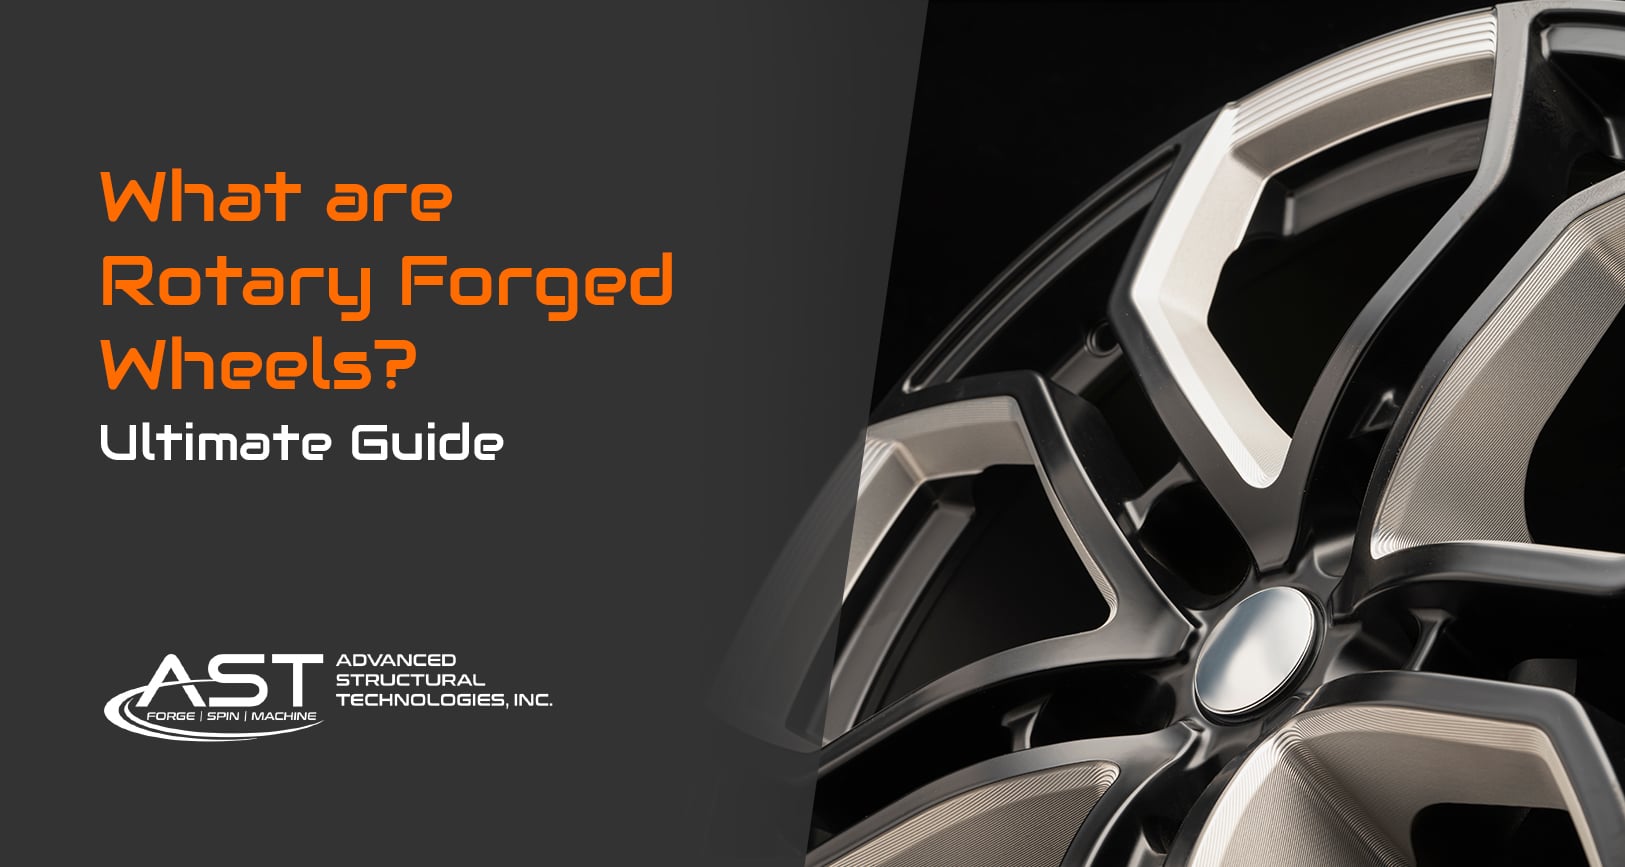 What are rotary forged wheels